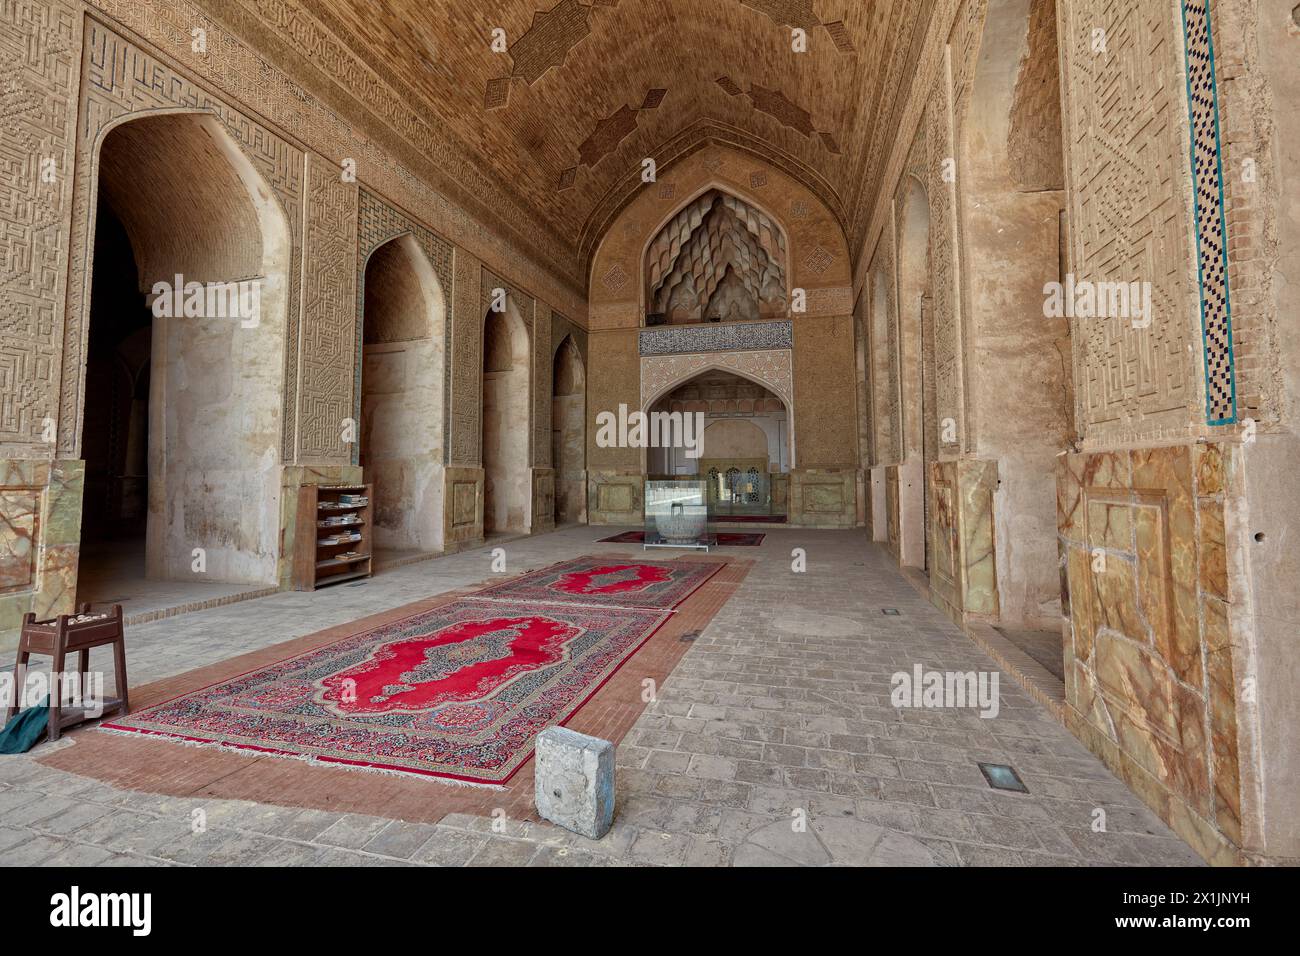 Interior view of the Jameh Mosque of Isfahan (first built in 8th c.), one of the oldest mosques in Iran and UNESCO World Heritage Site. Isfahan, Iran. Stock Photo